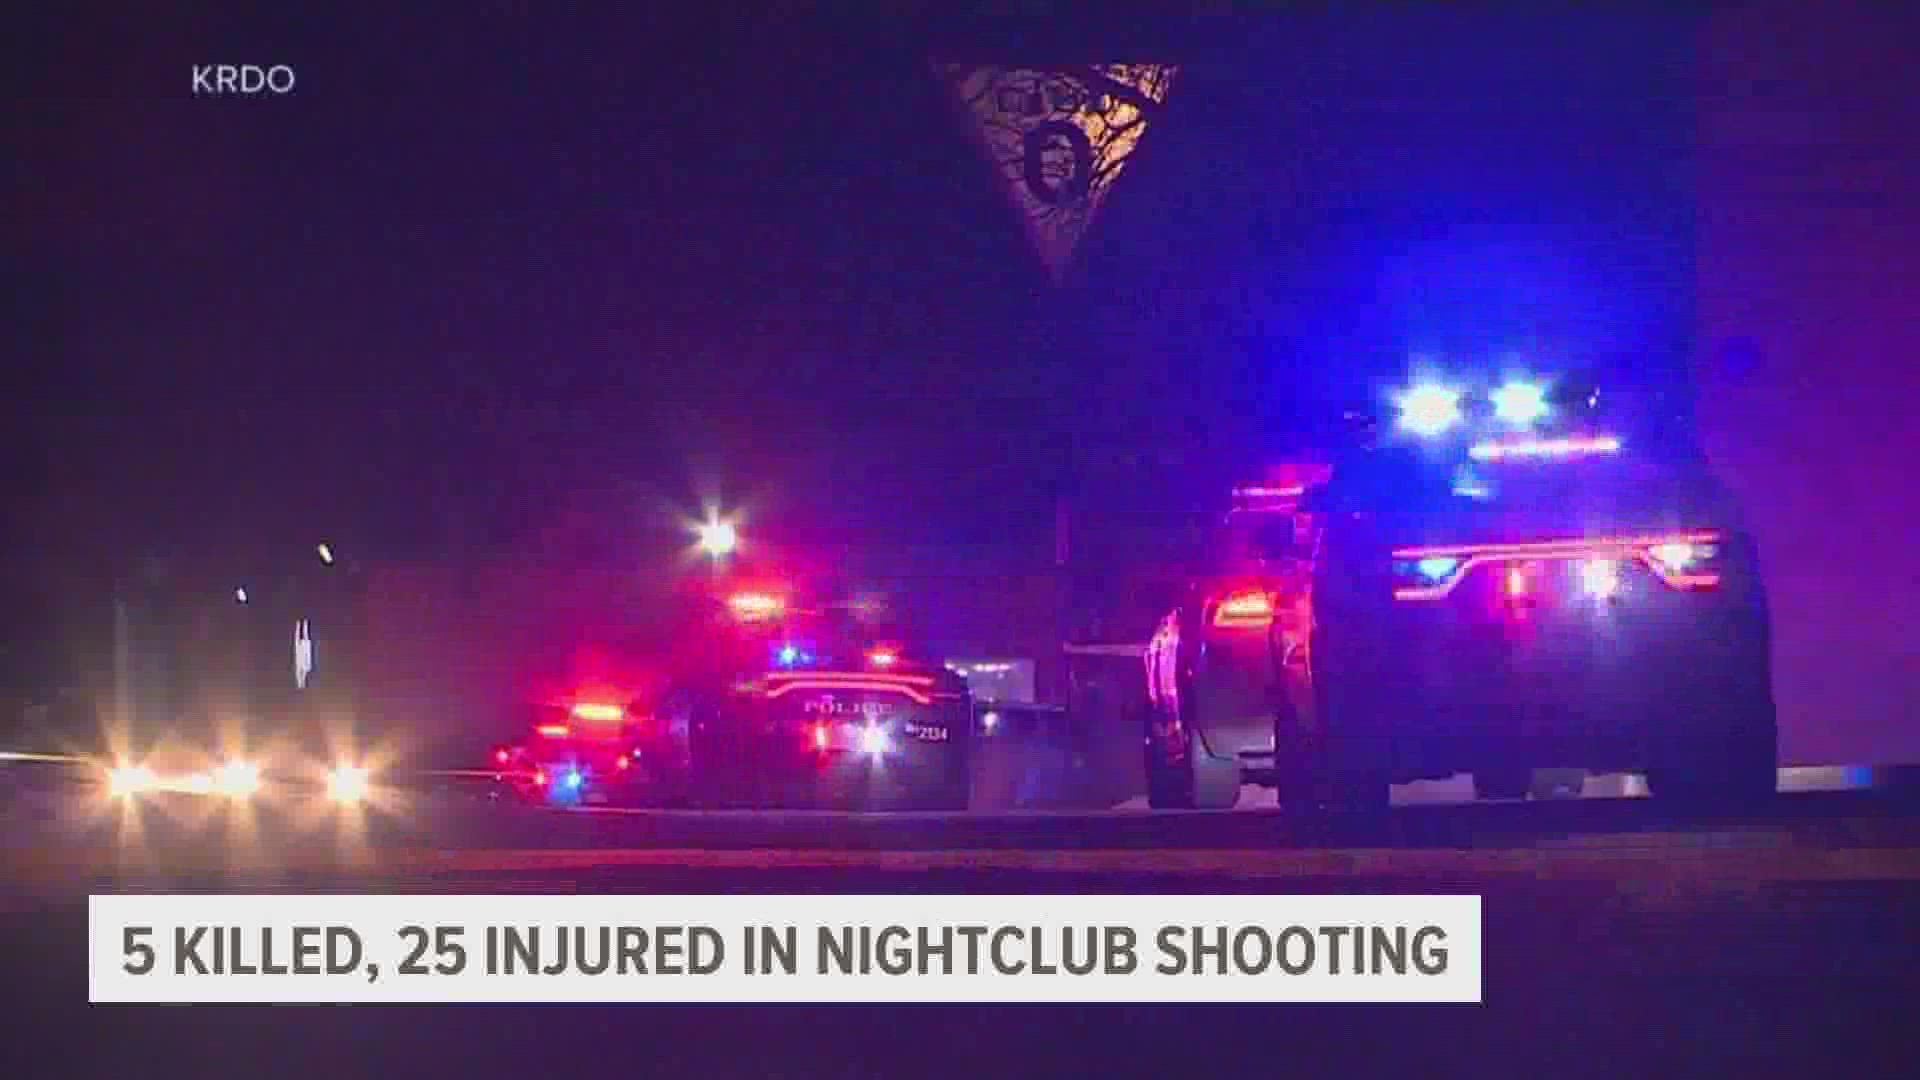 Officials said the 22-year-old gunman walked into the nightclub and immediately began shooting, killing five people.